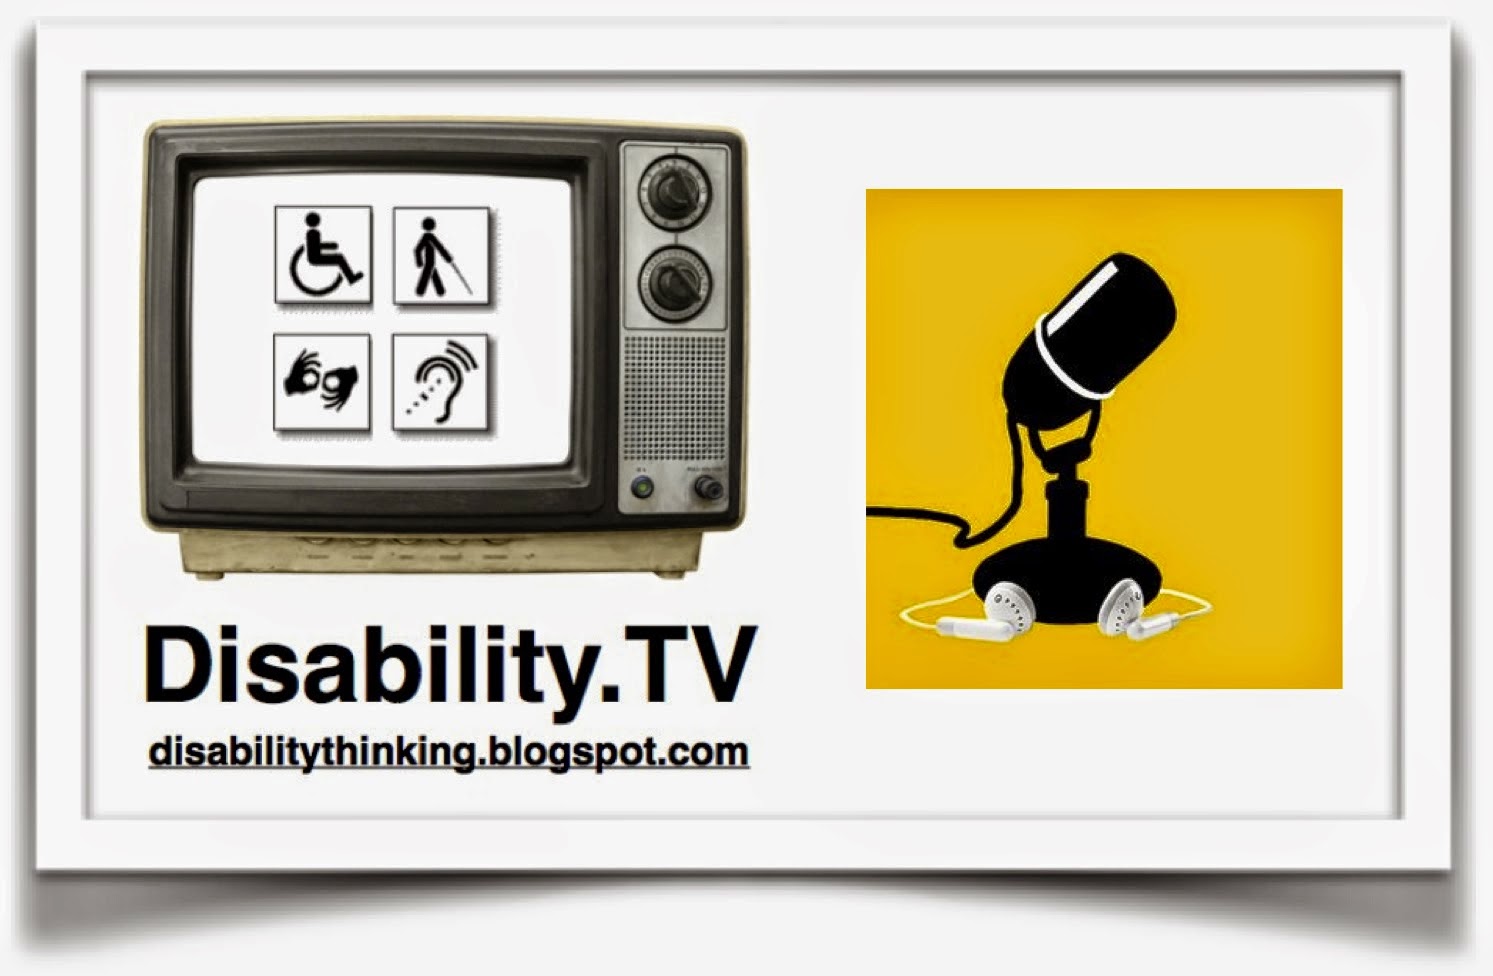 Disability.TV logo on the left, microphone icon on the right